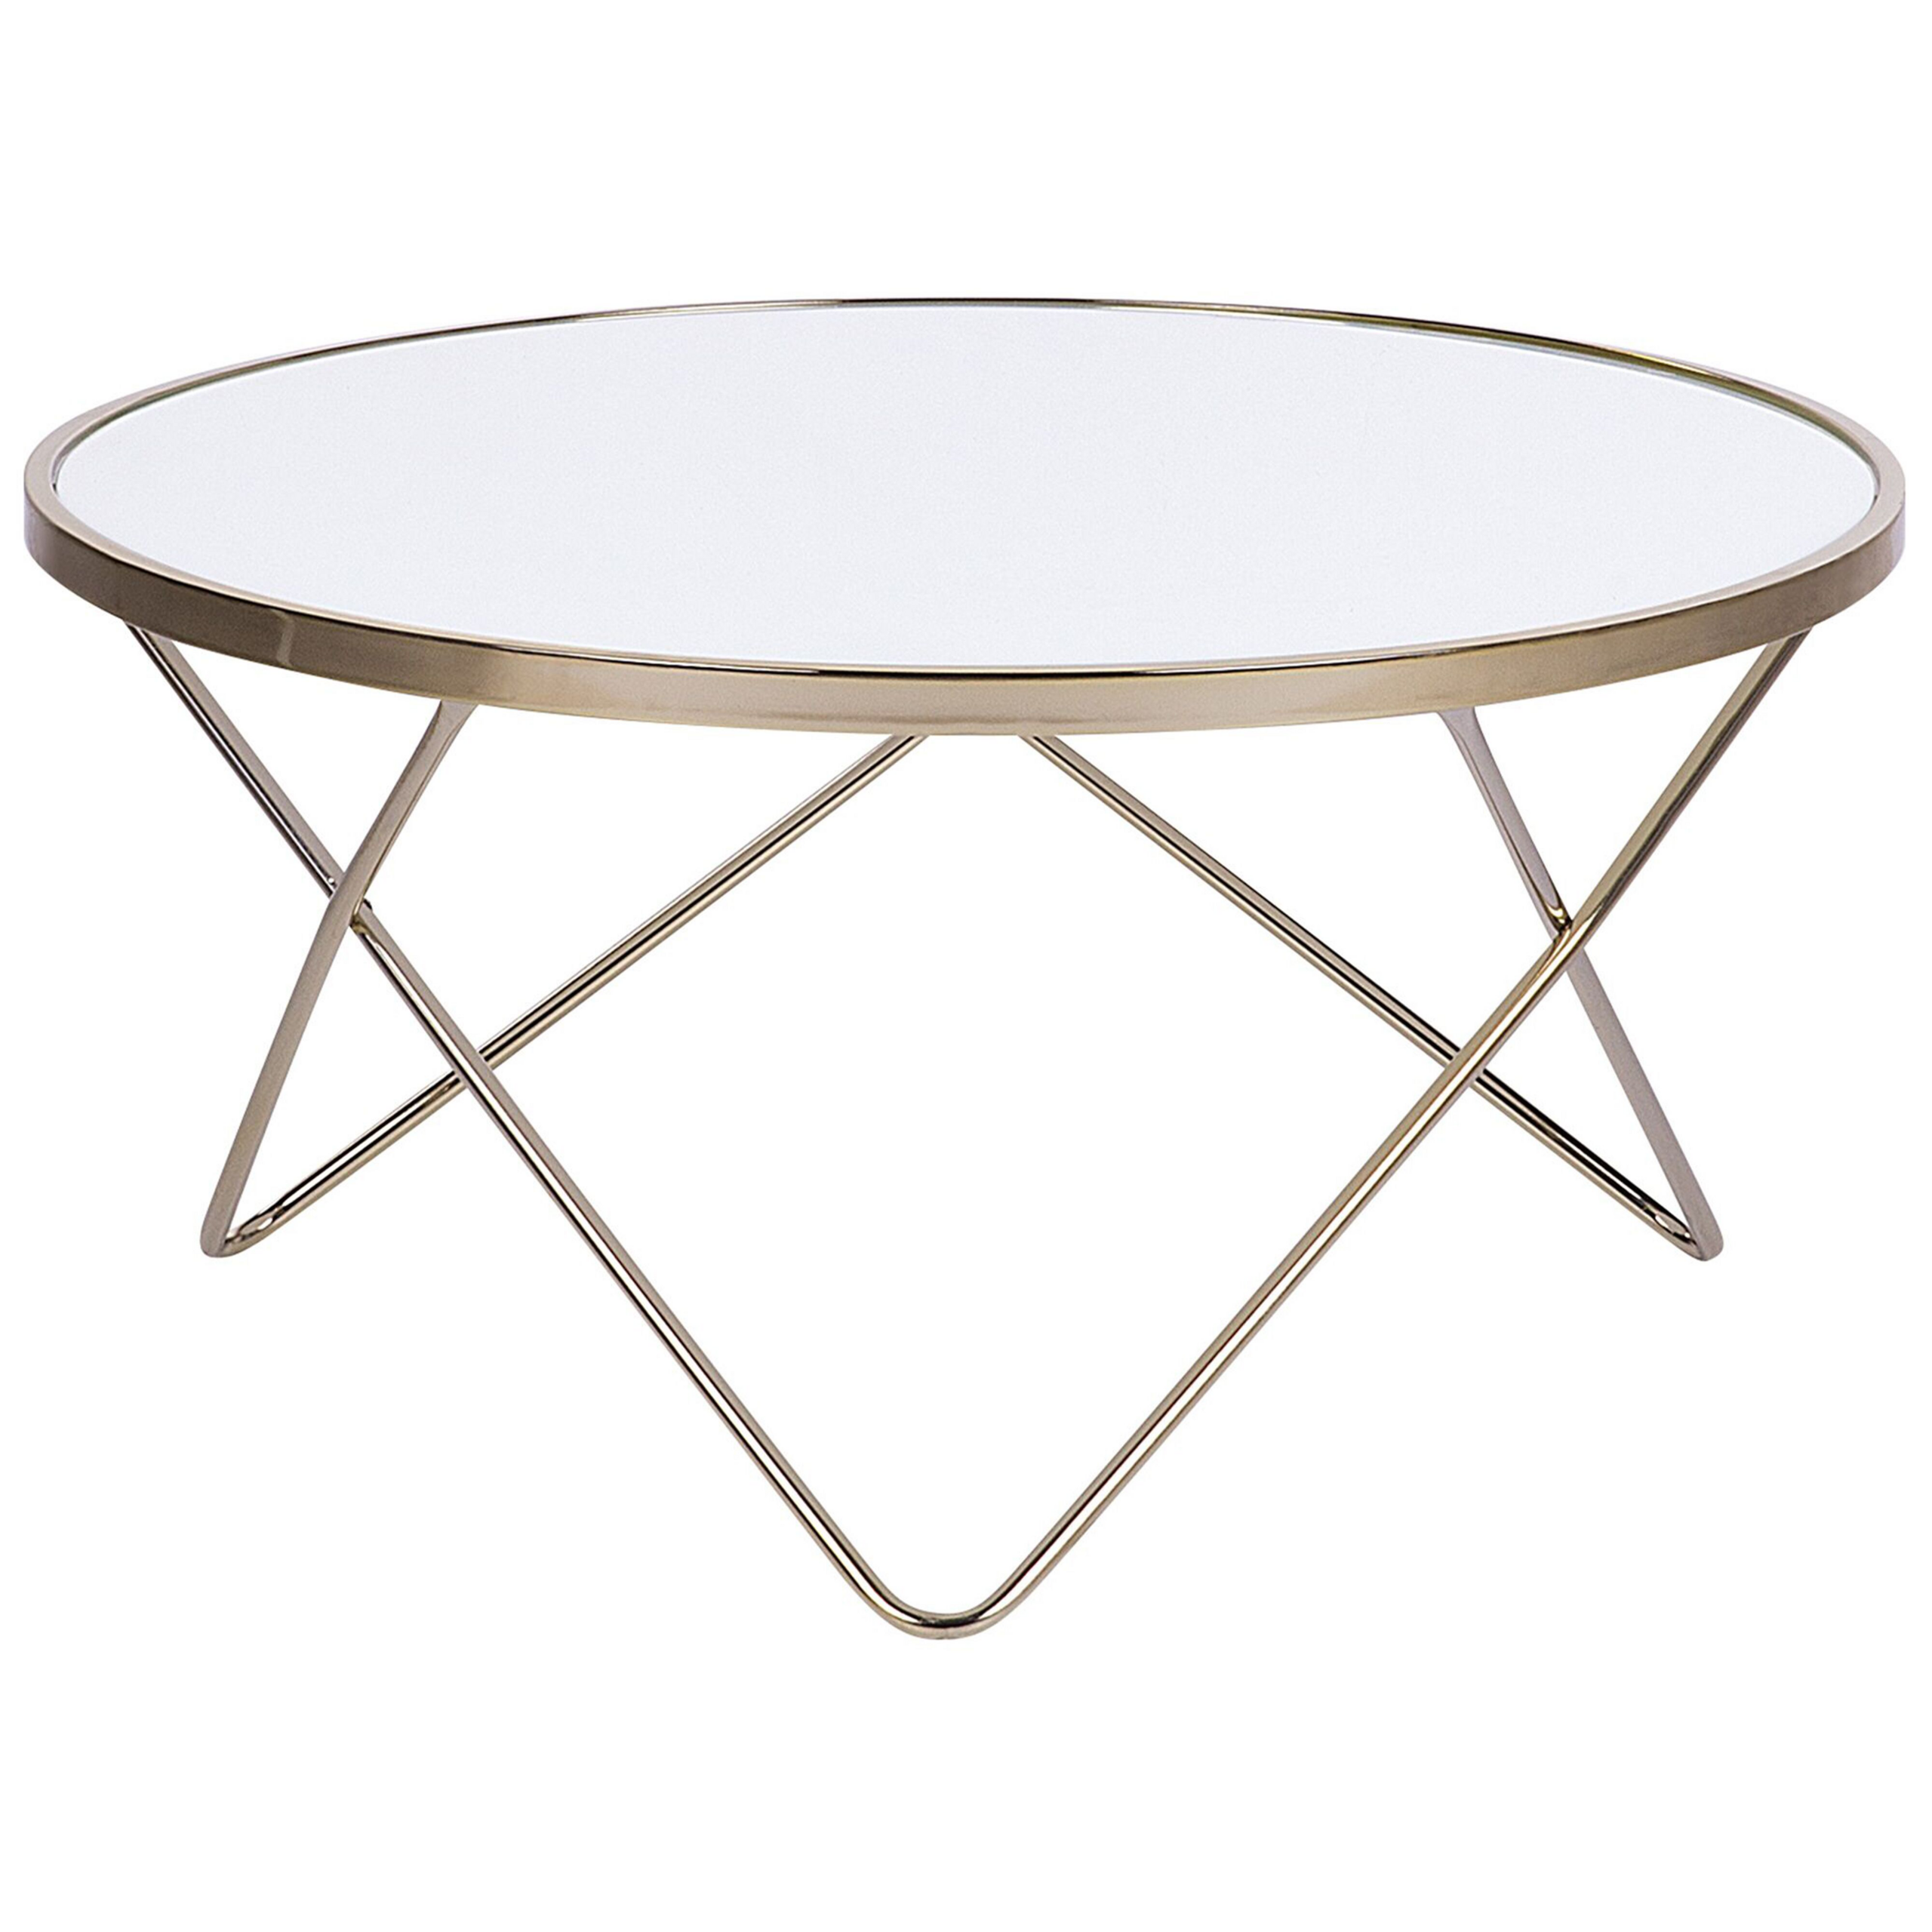 Beliani Coffee Table White Tempered Glass Top Gold Metal Hairpin Legs Round Shape